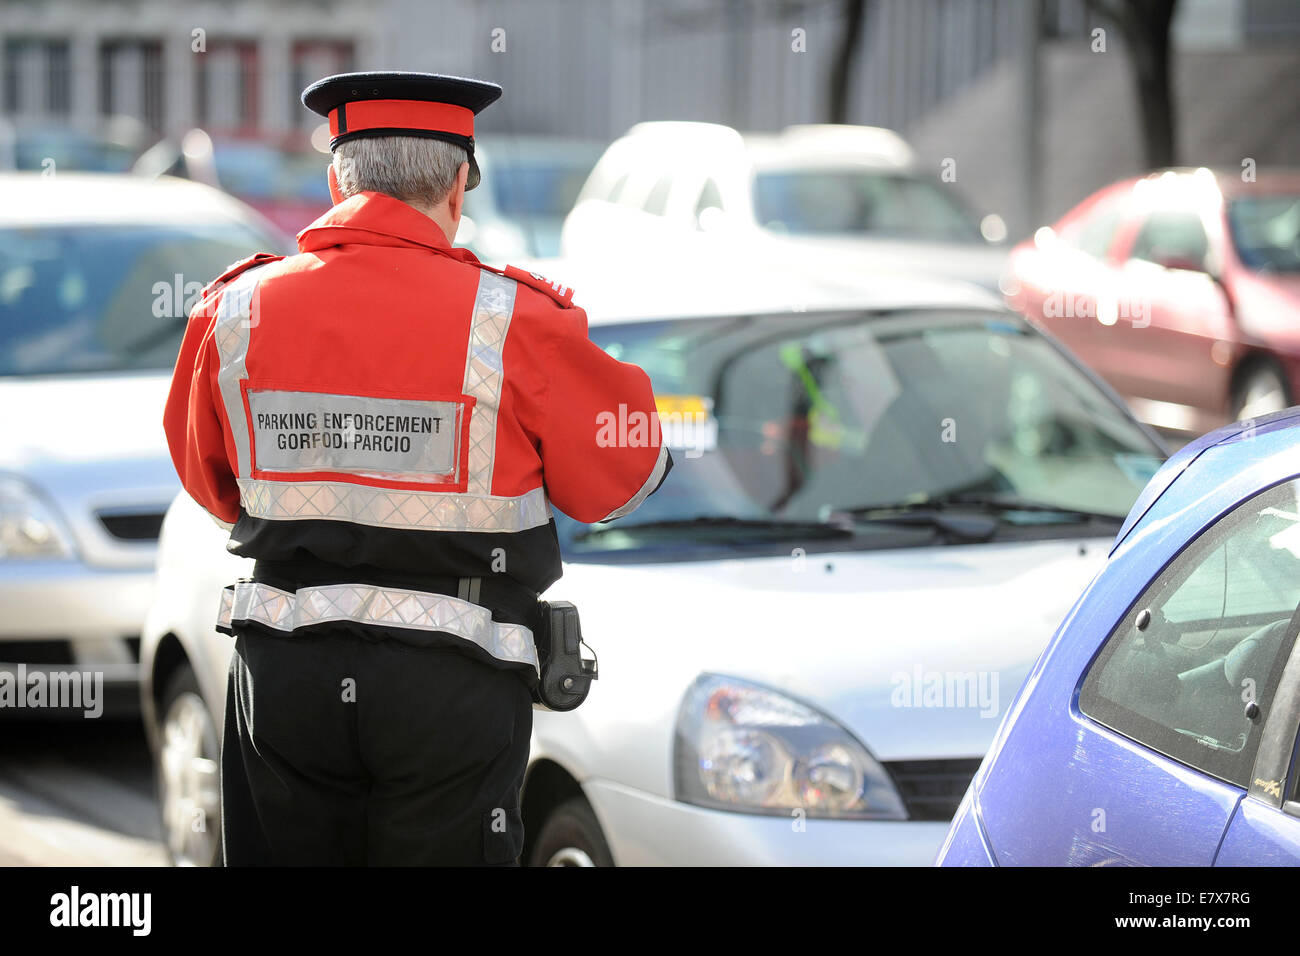 A traffic warden (civil enforcement officer) on patrol issuing parking tickets to illegally parked cars in Cardiff, Wales. Stock Photo